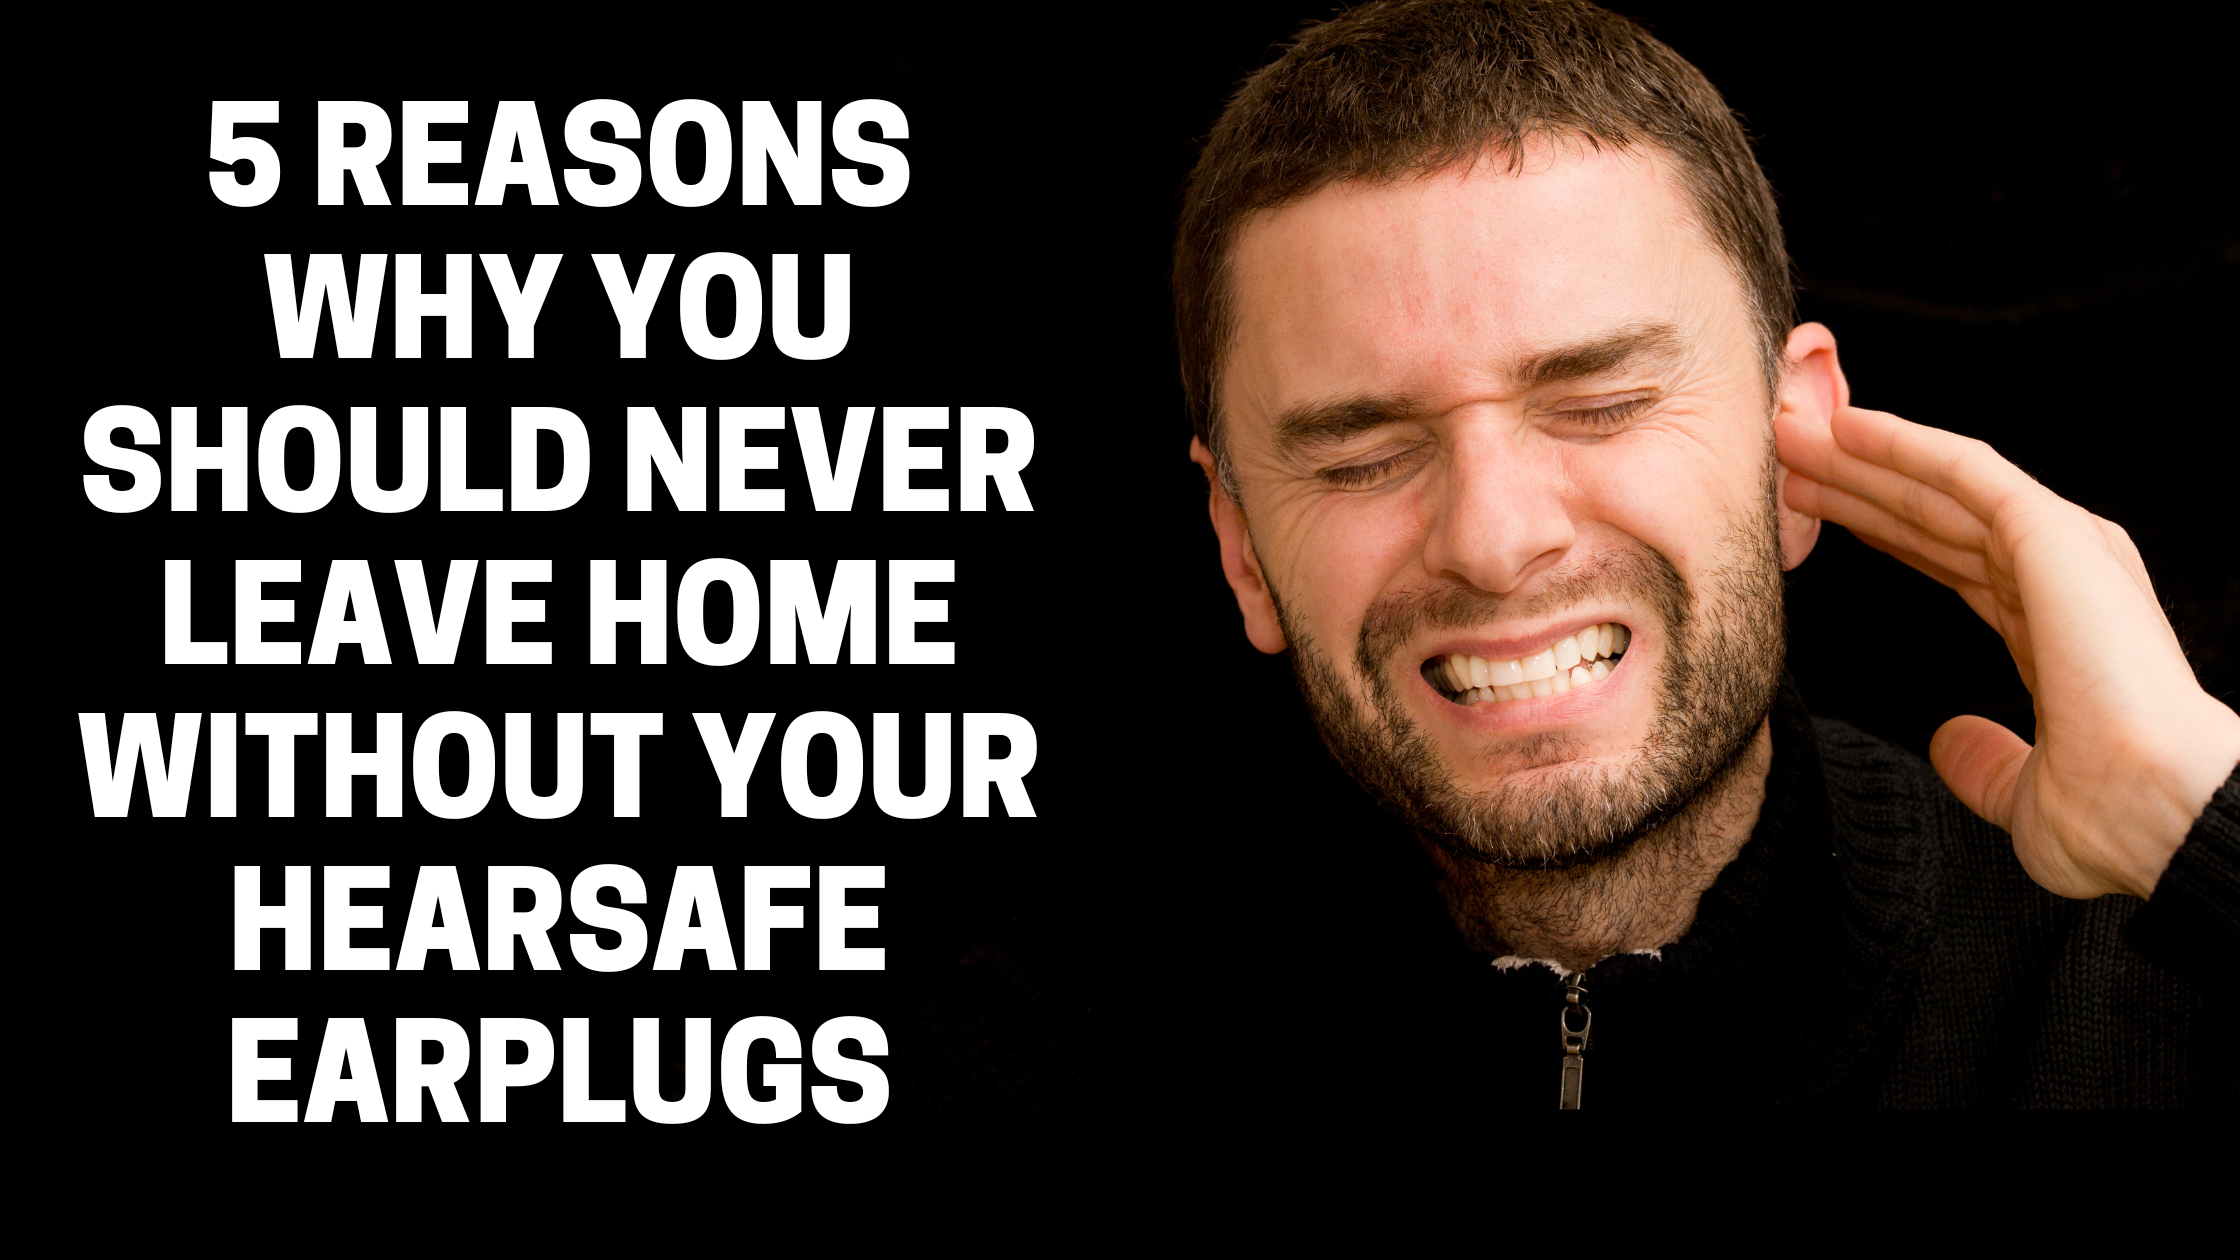 5 reasons why you should never leave home without your HearSafe earplugs